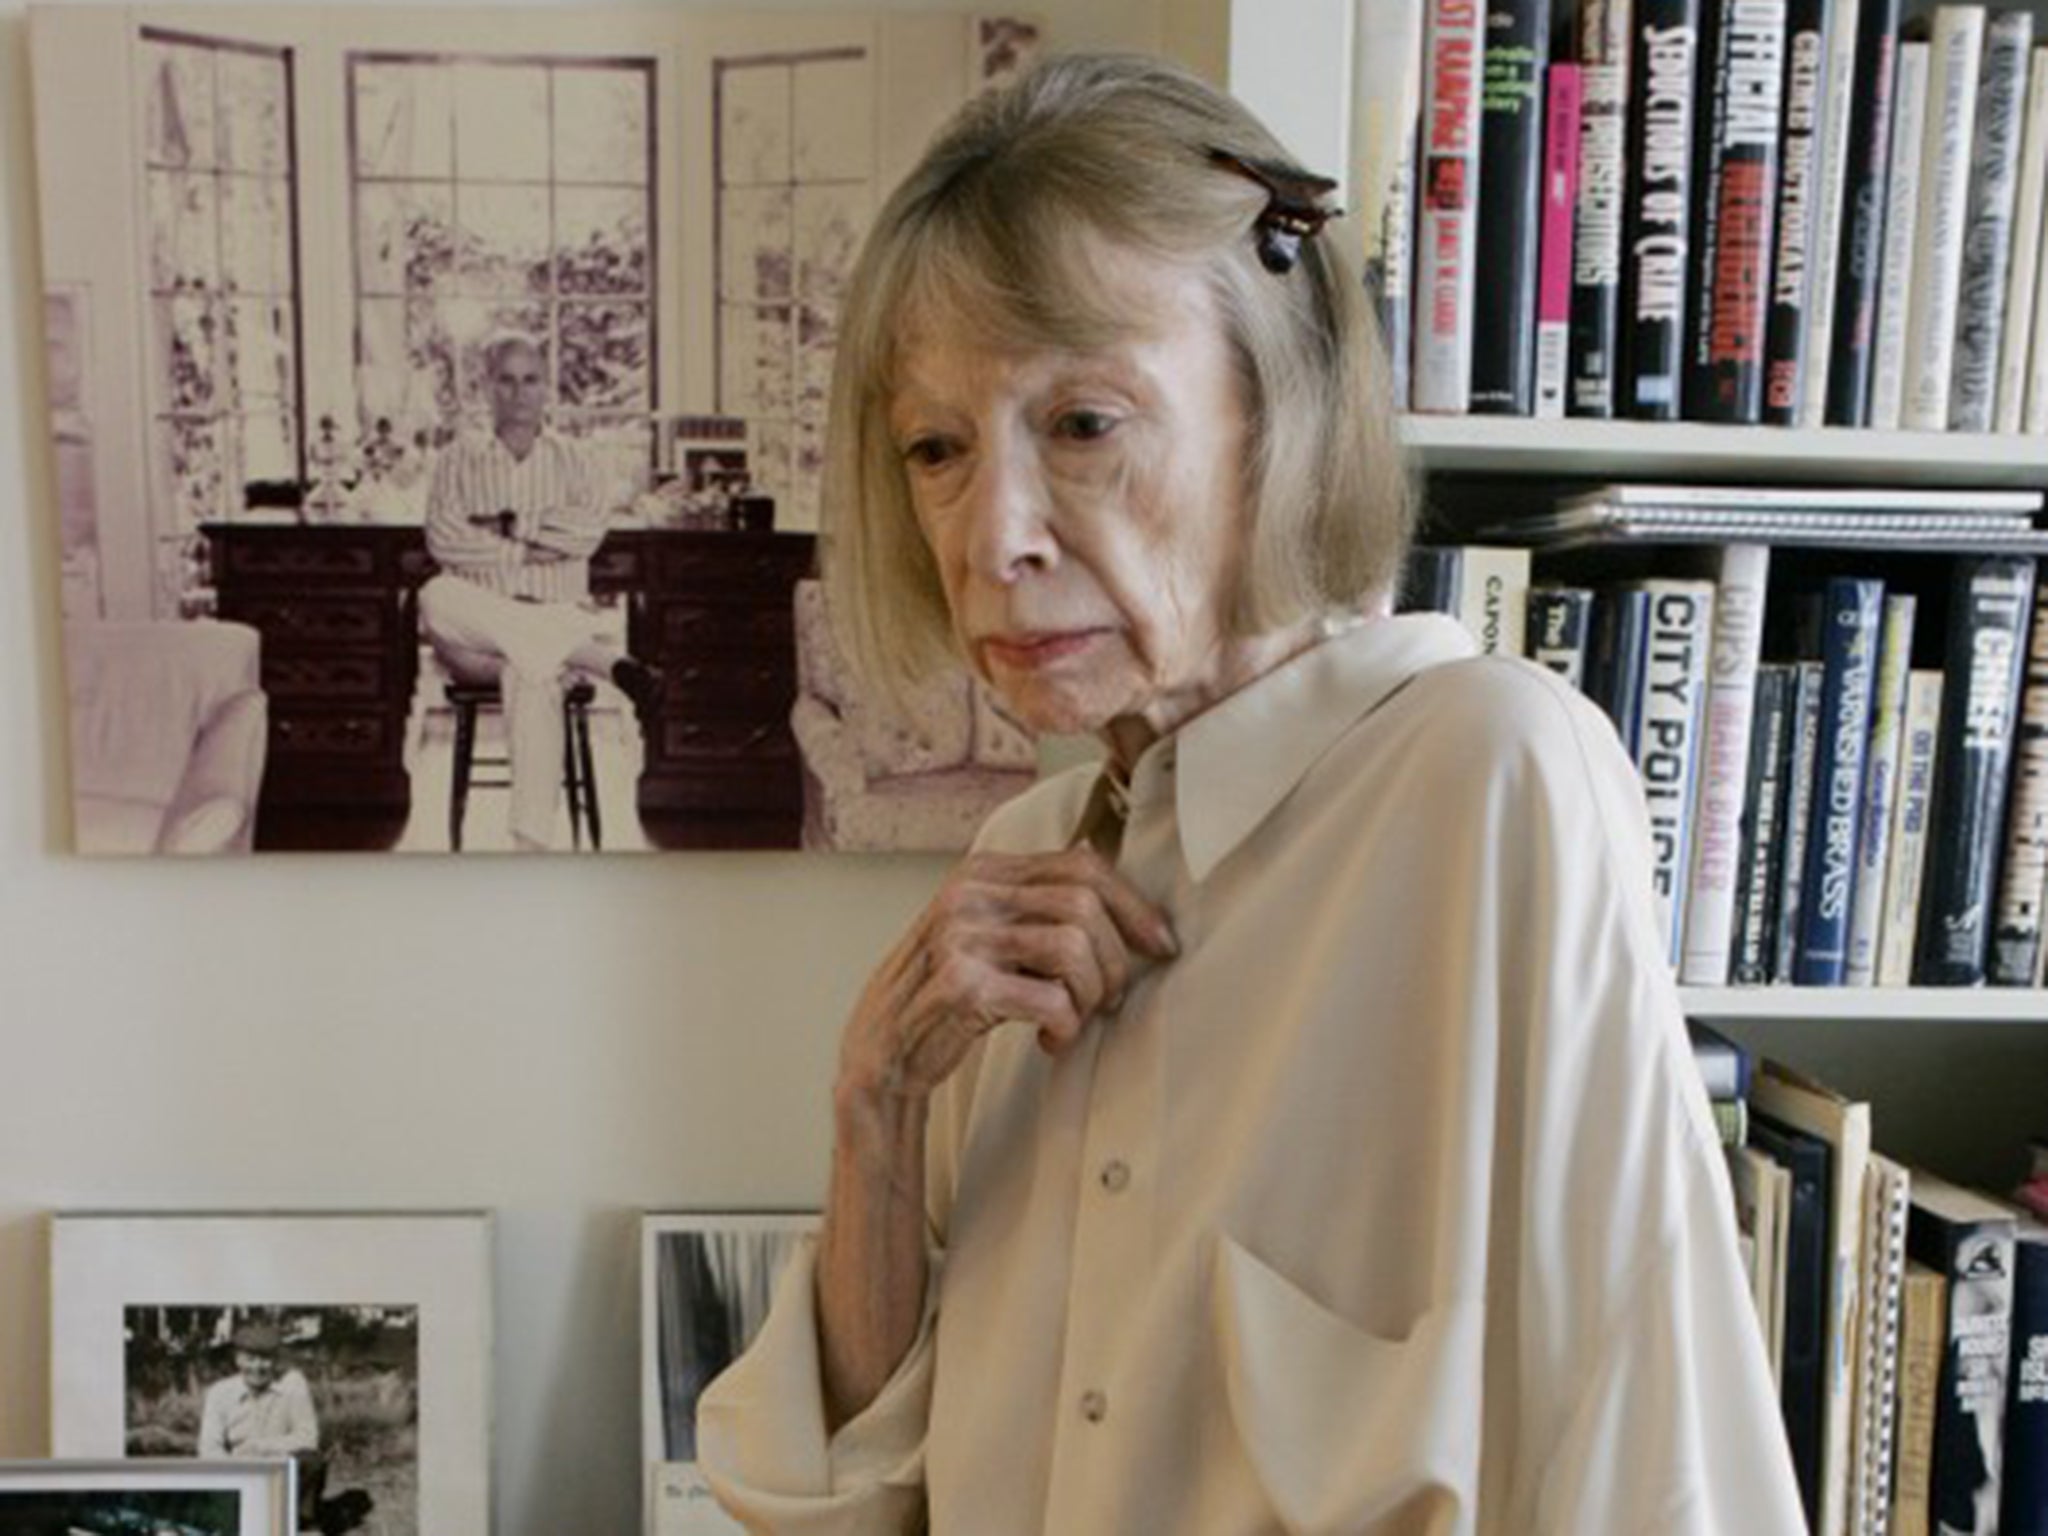 Author Joan Didion is unveiled as model for ultra-chic fashion label ...